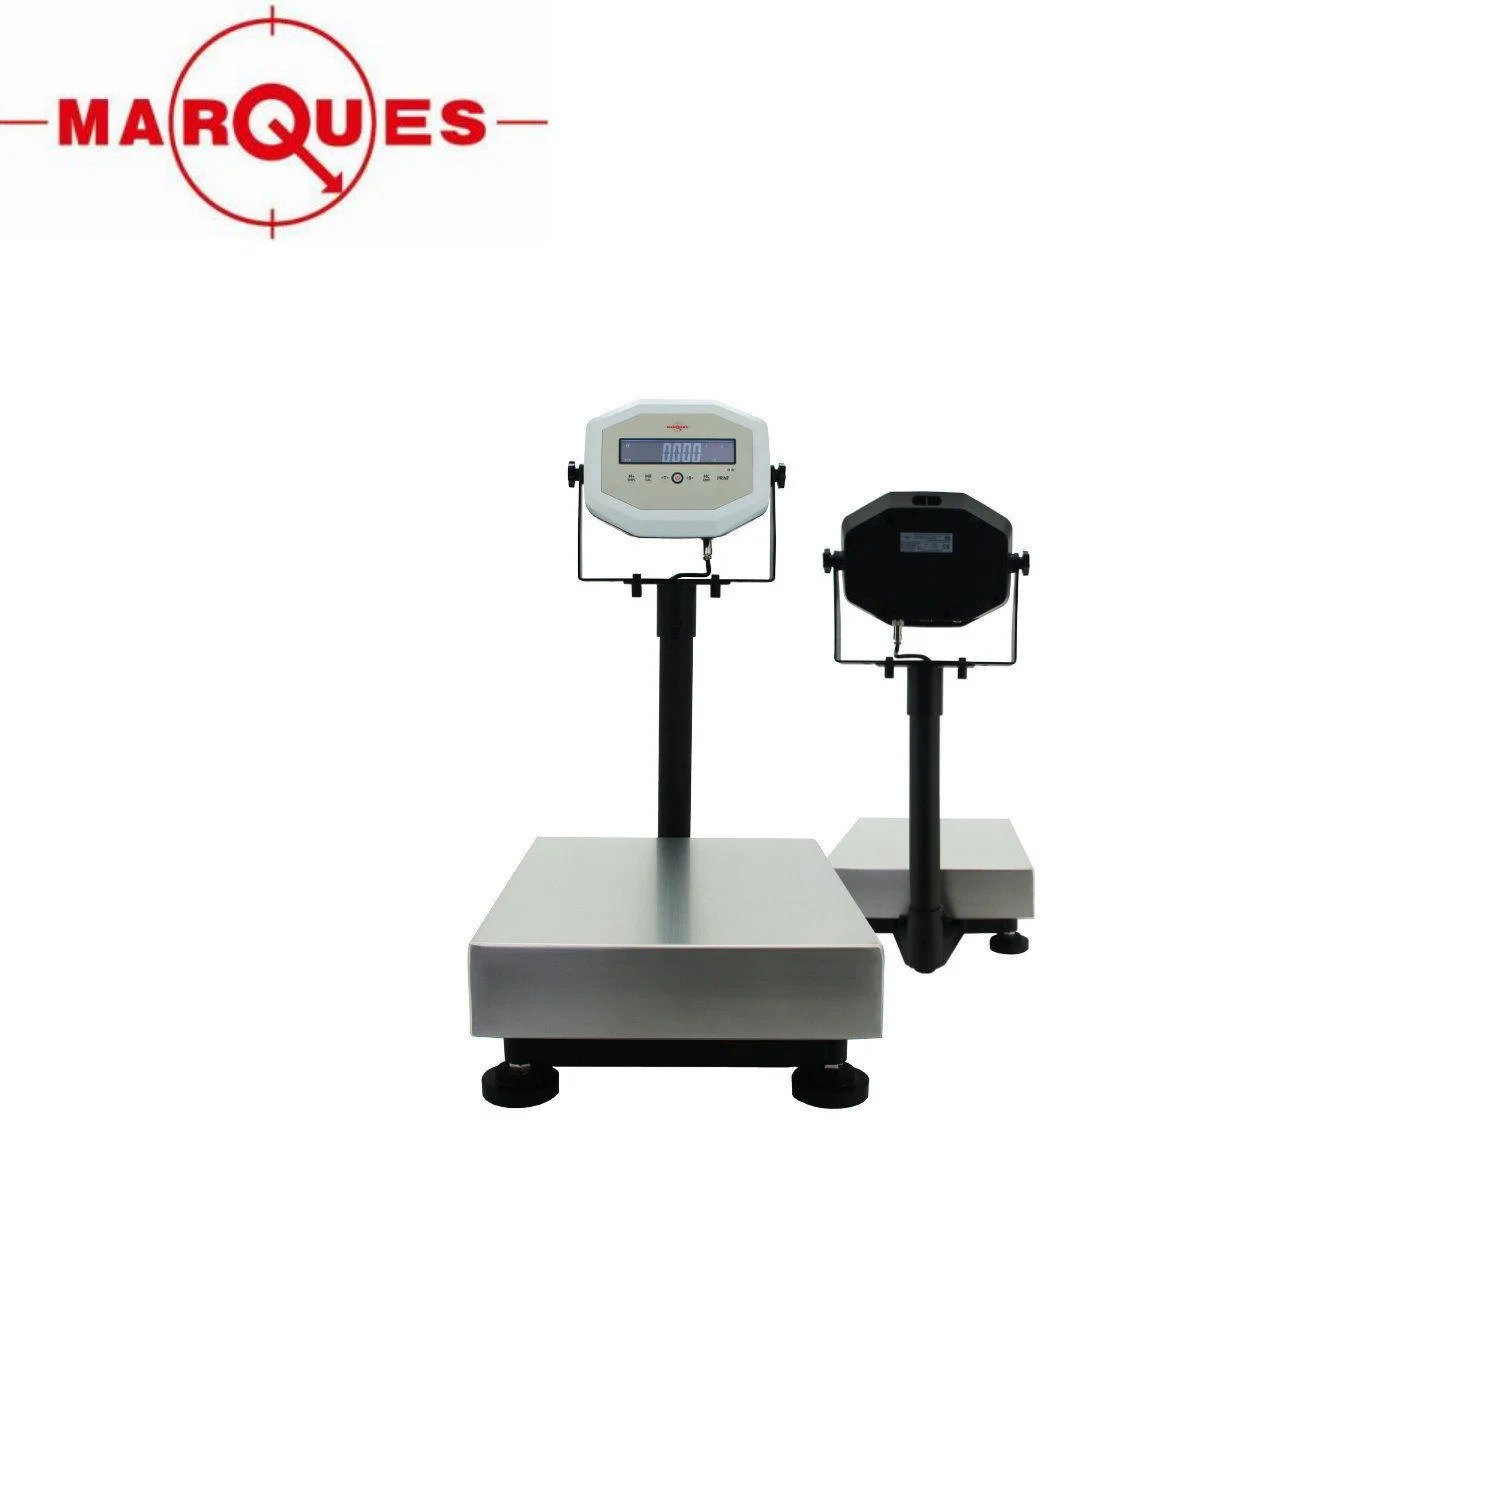 60kg Waterproof Stainless Steel Electronic Automatic Weighing Platform Scale with RS232 Port LCD Display IP65